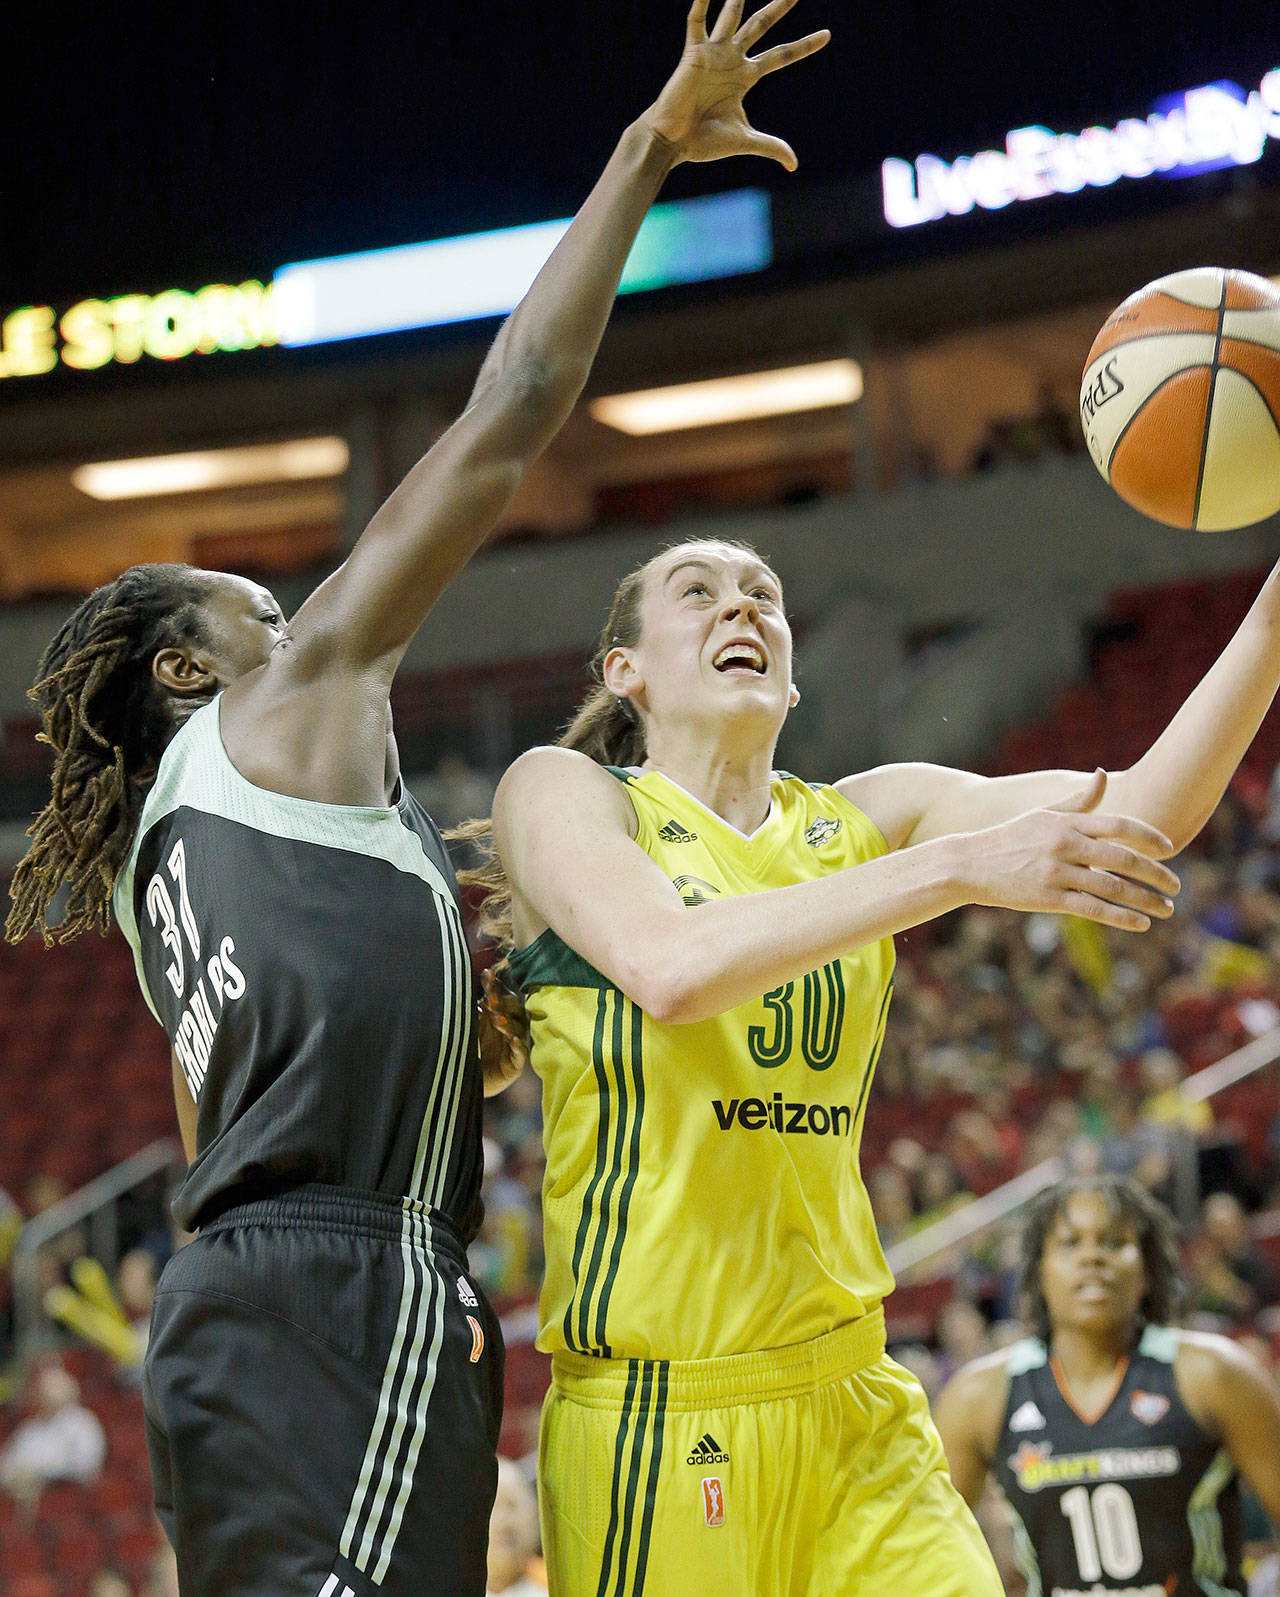 Seattle’s Breanna Stewart (right) drives past New York’s Tina Charles during the Storm’s 79-70 loss to the Liberty on Thursday in Seattle. (Elaine Thompson/Associated Press)